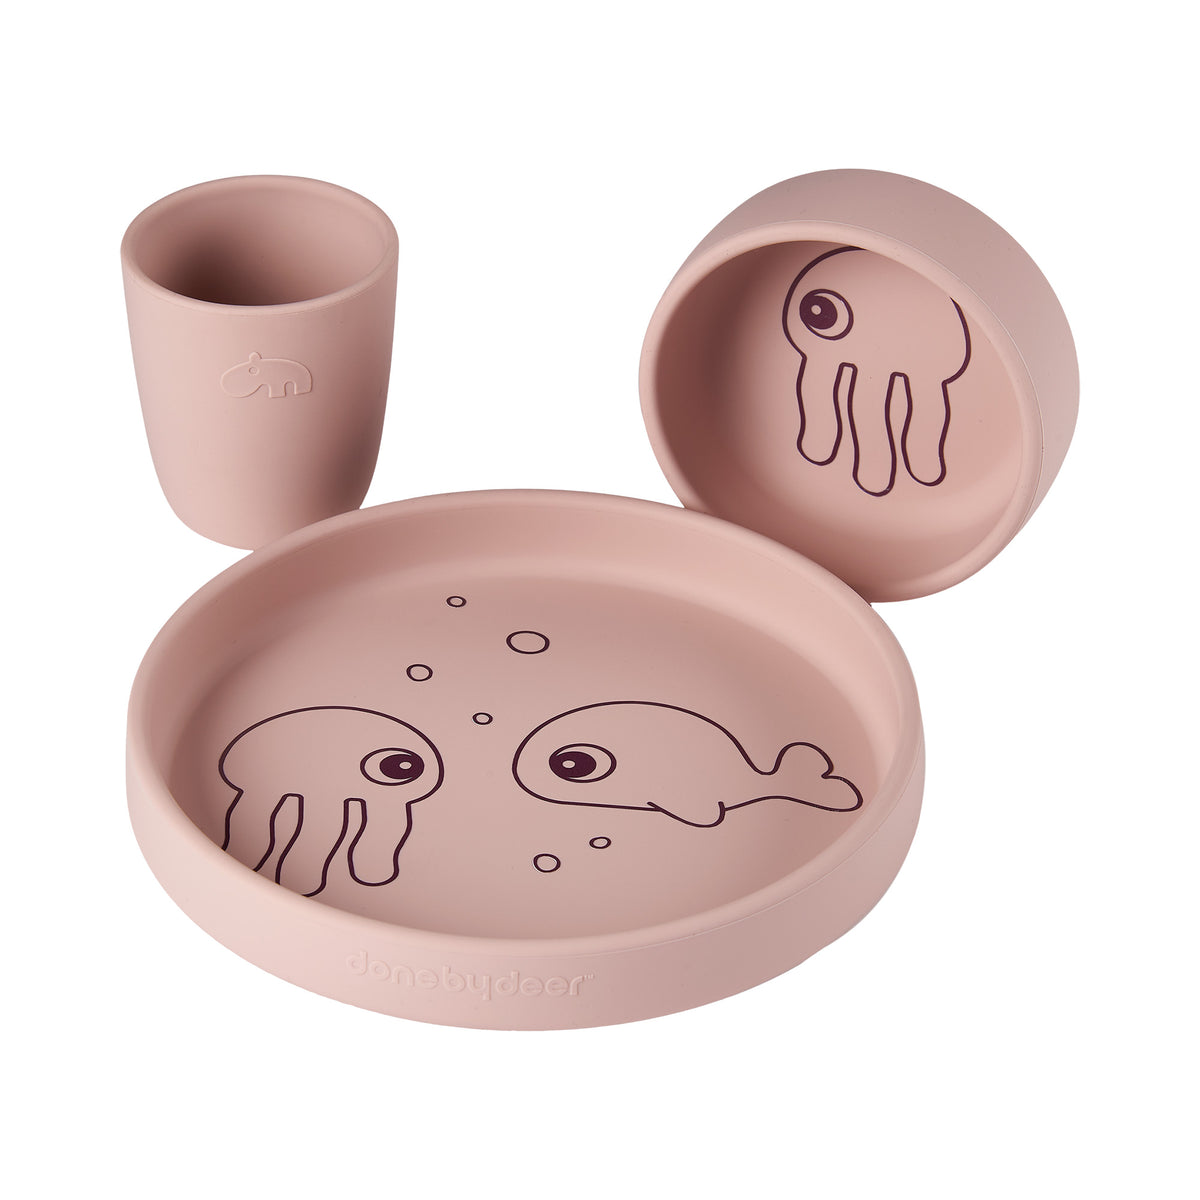 Silicone dinner set - Sea friends - Powder - Front